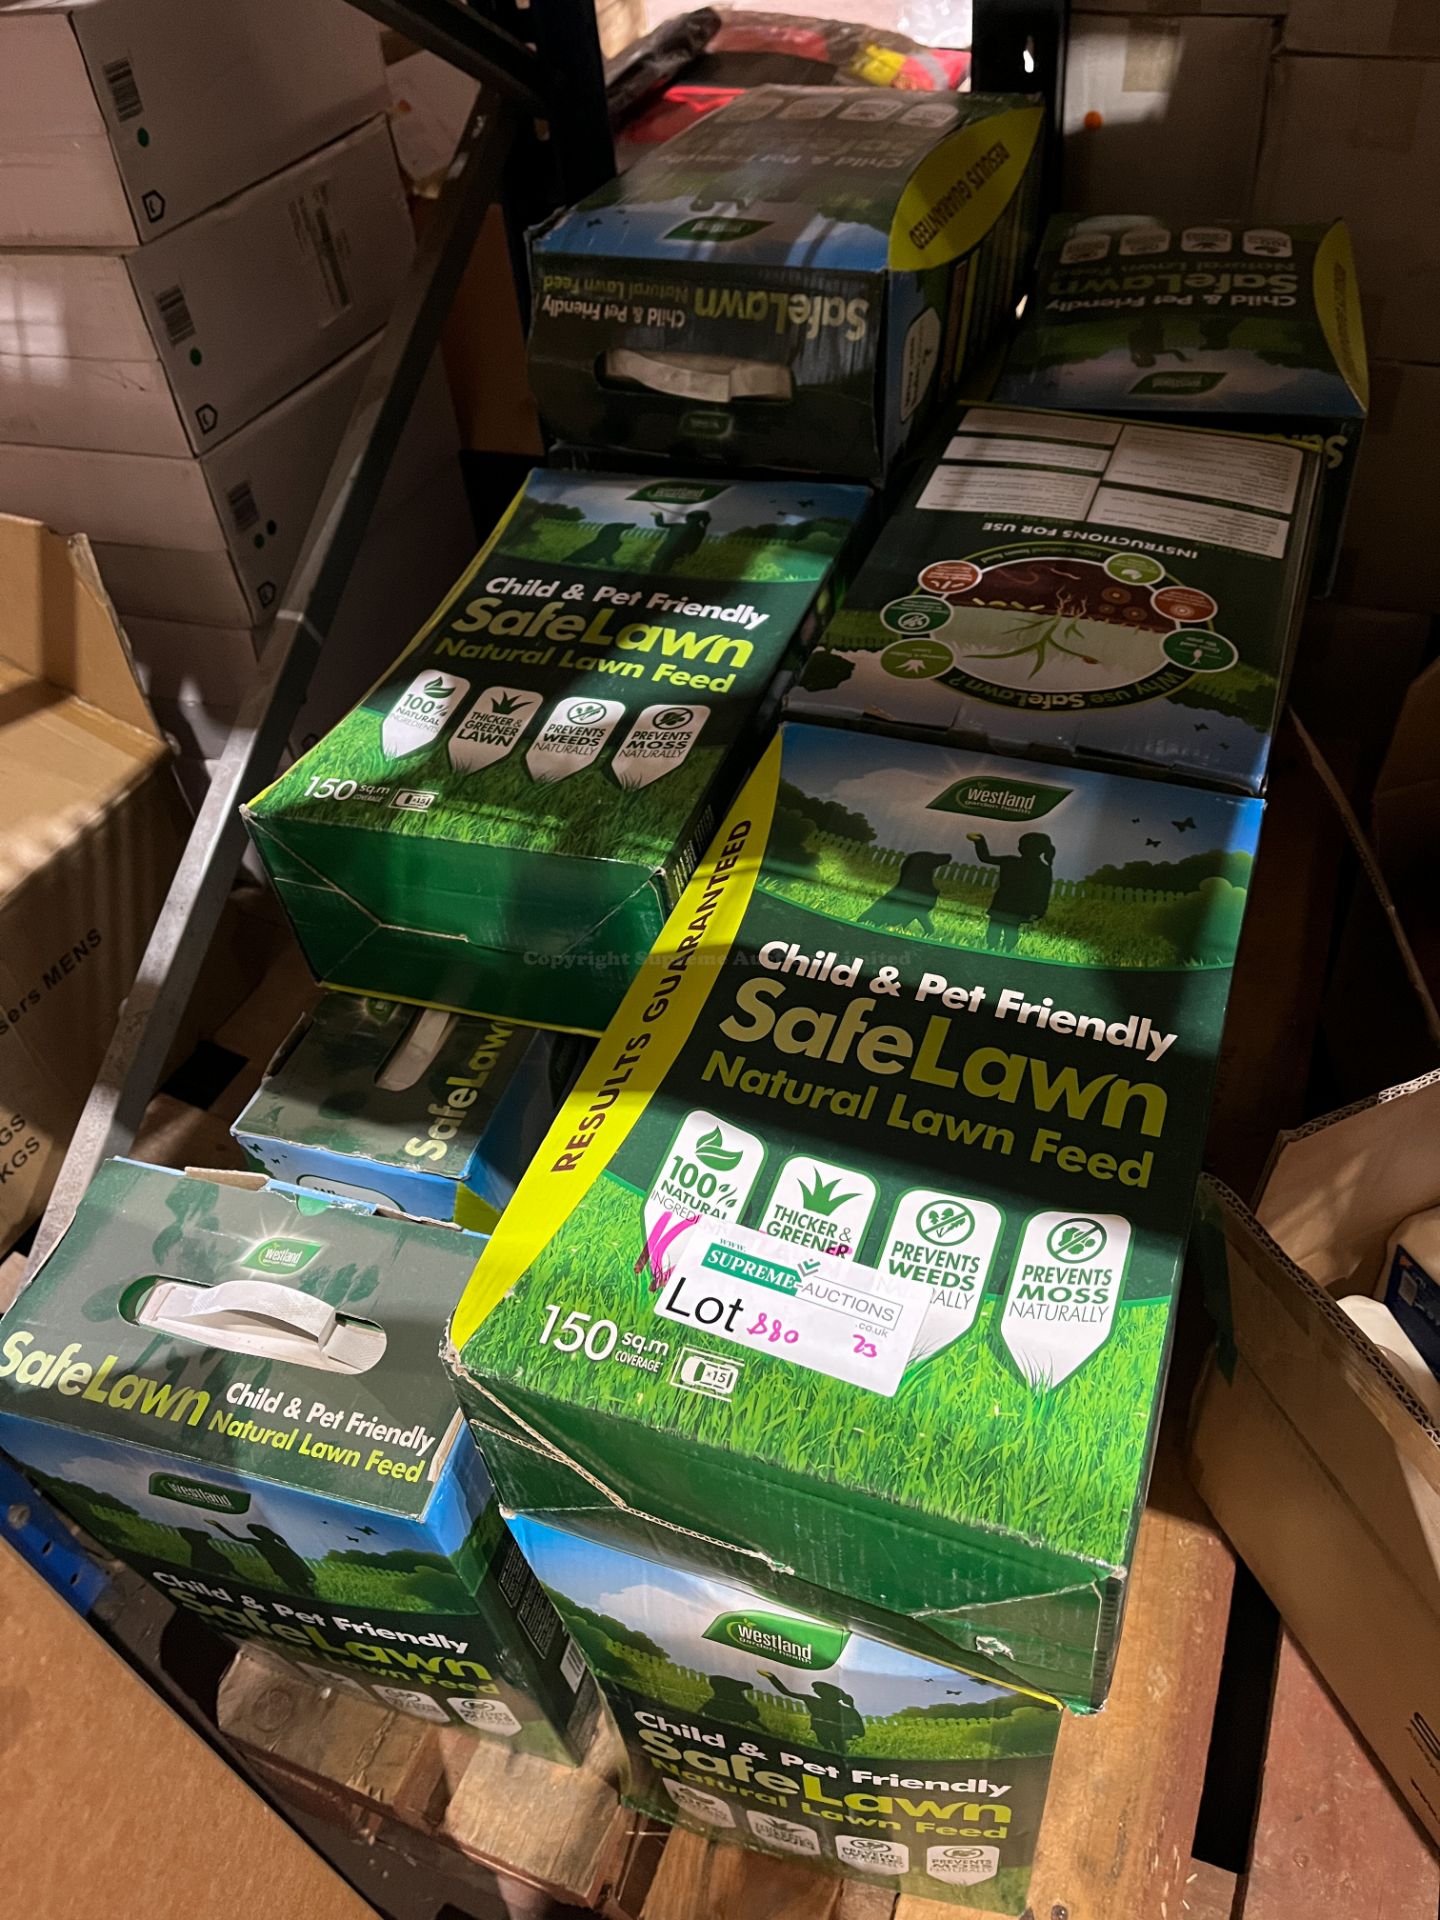 16 X BRAND NEW WESTLAND CHILD AND PET FRIENDLY SAFE LAWN NATURAL LAWN FEED R10-6